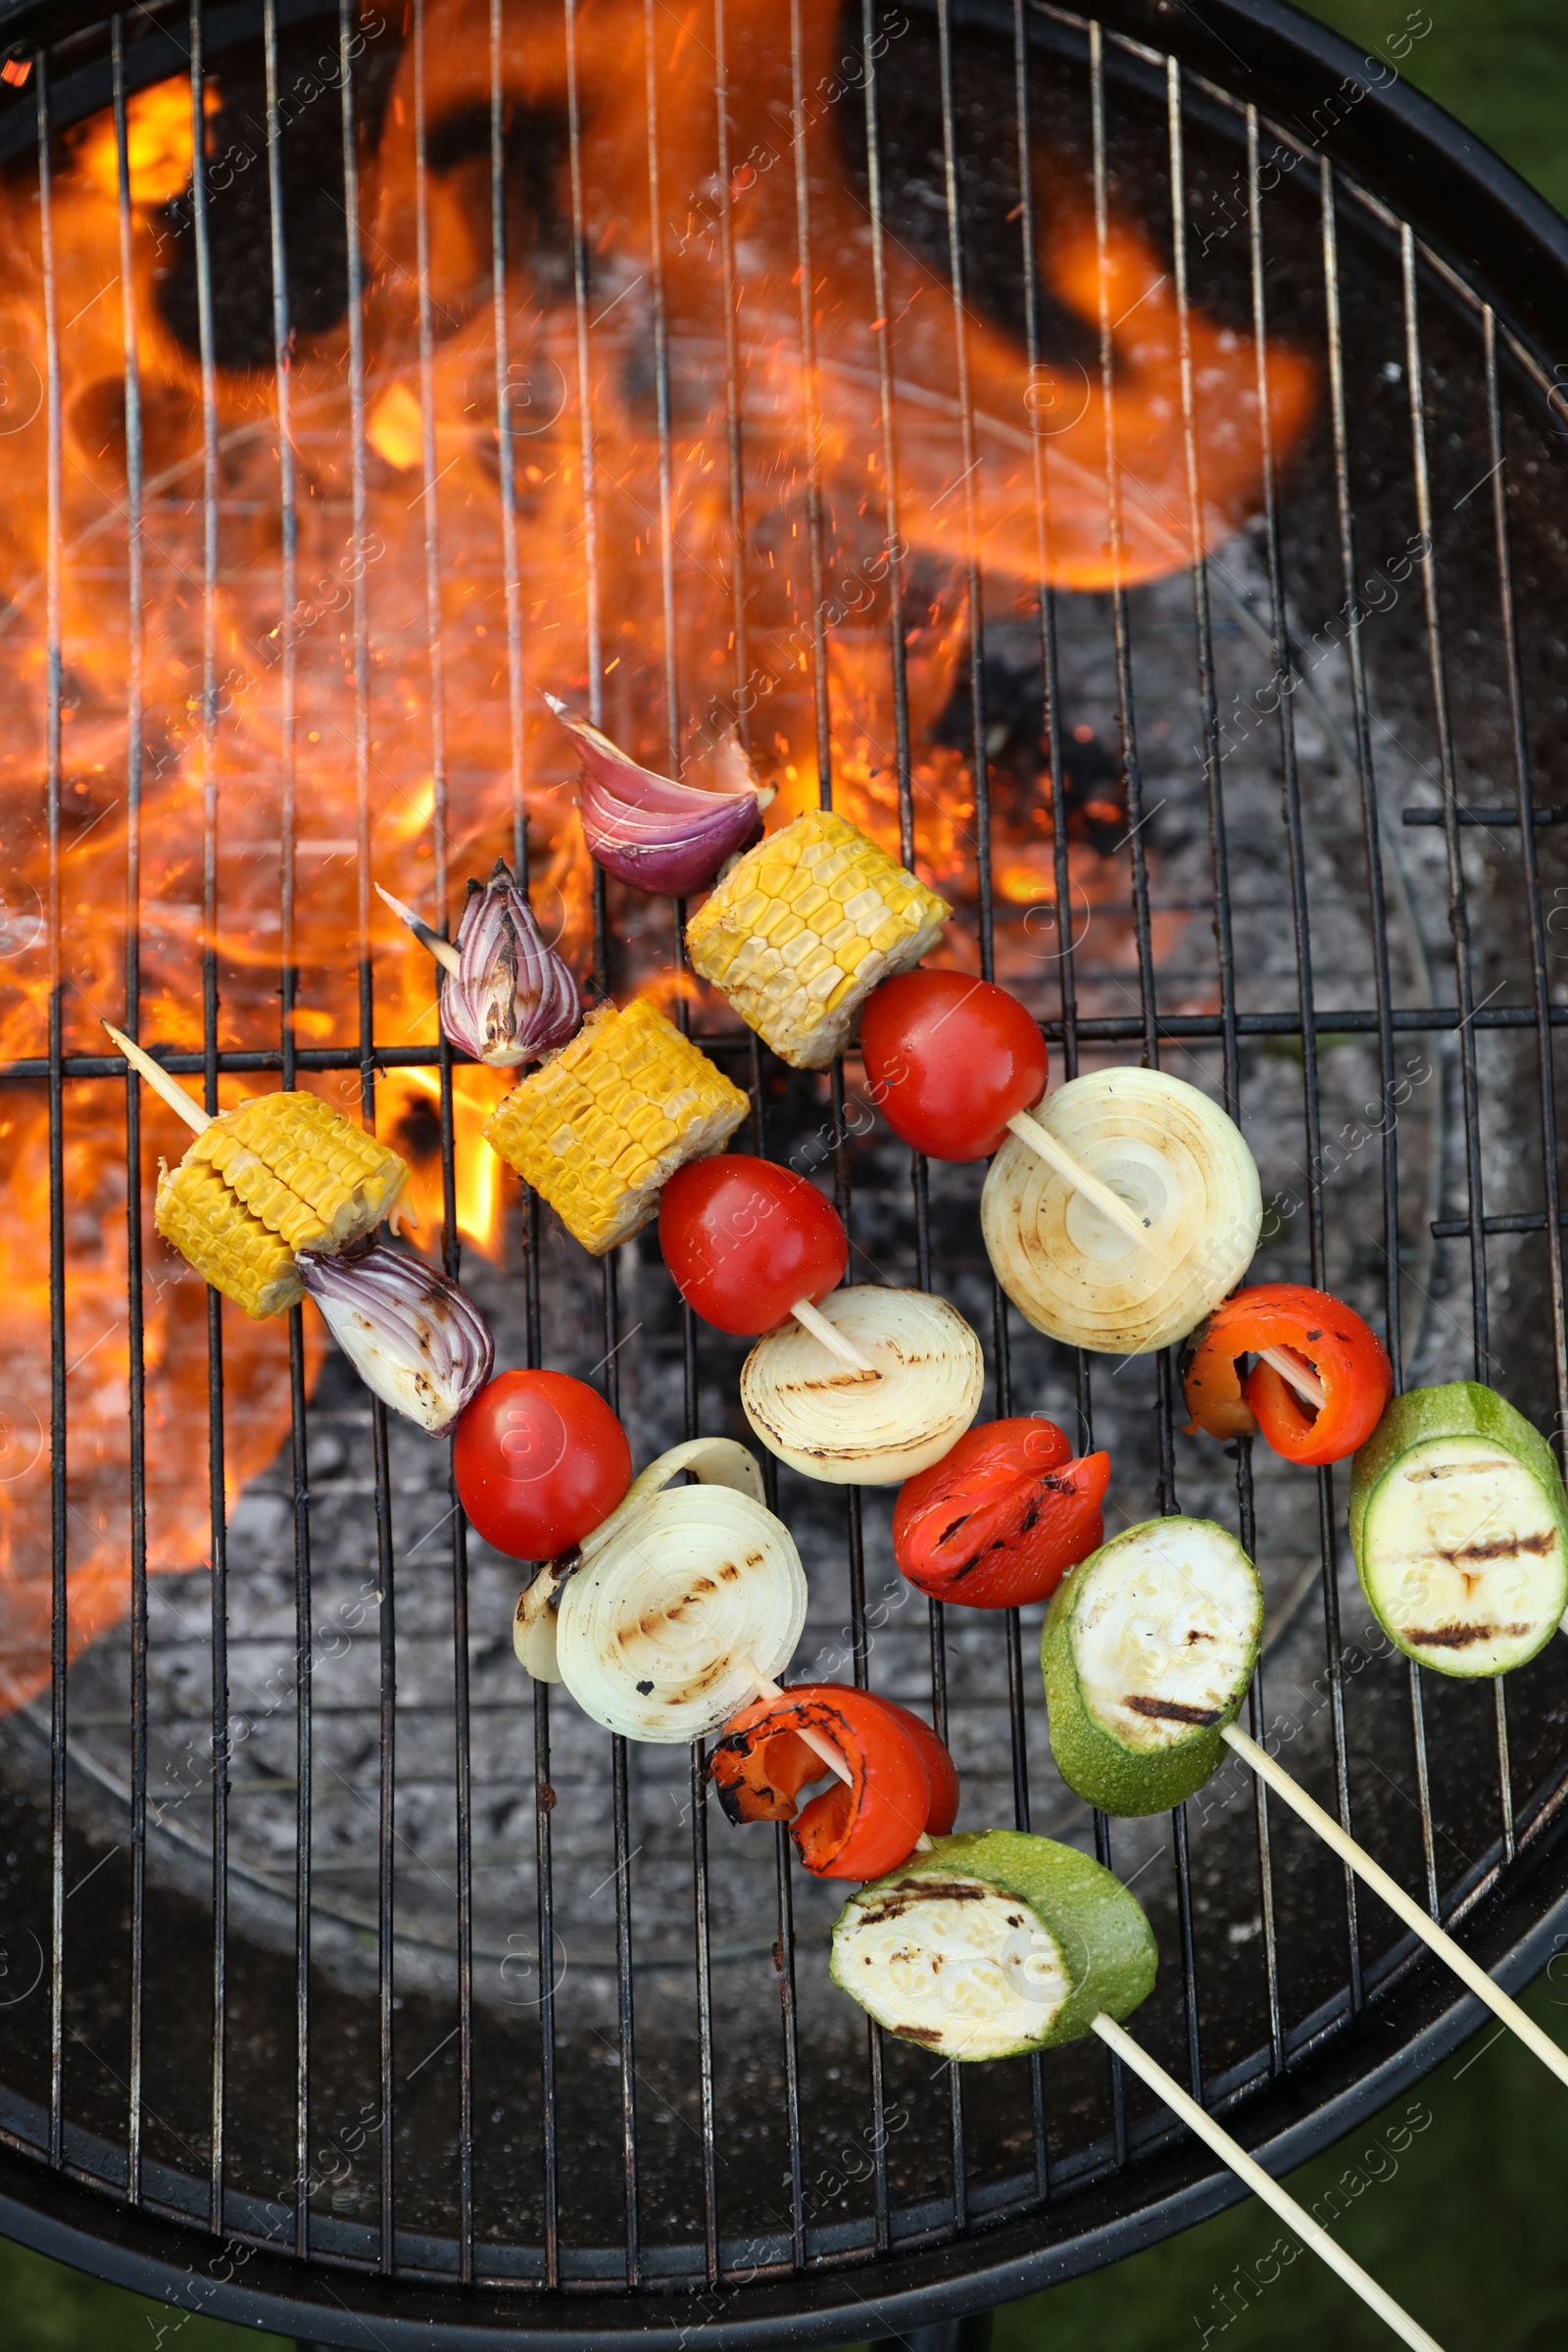 Photo of Skewers with delicious grilled vegetables on barbecue grill outdoors, top view